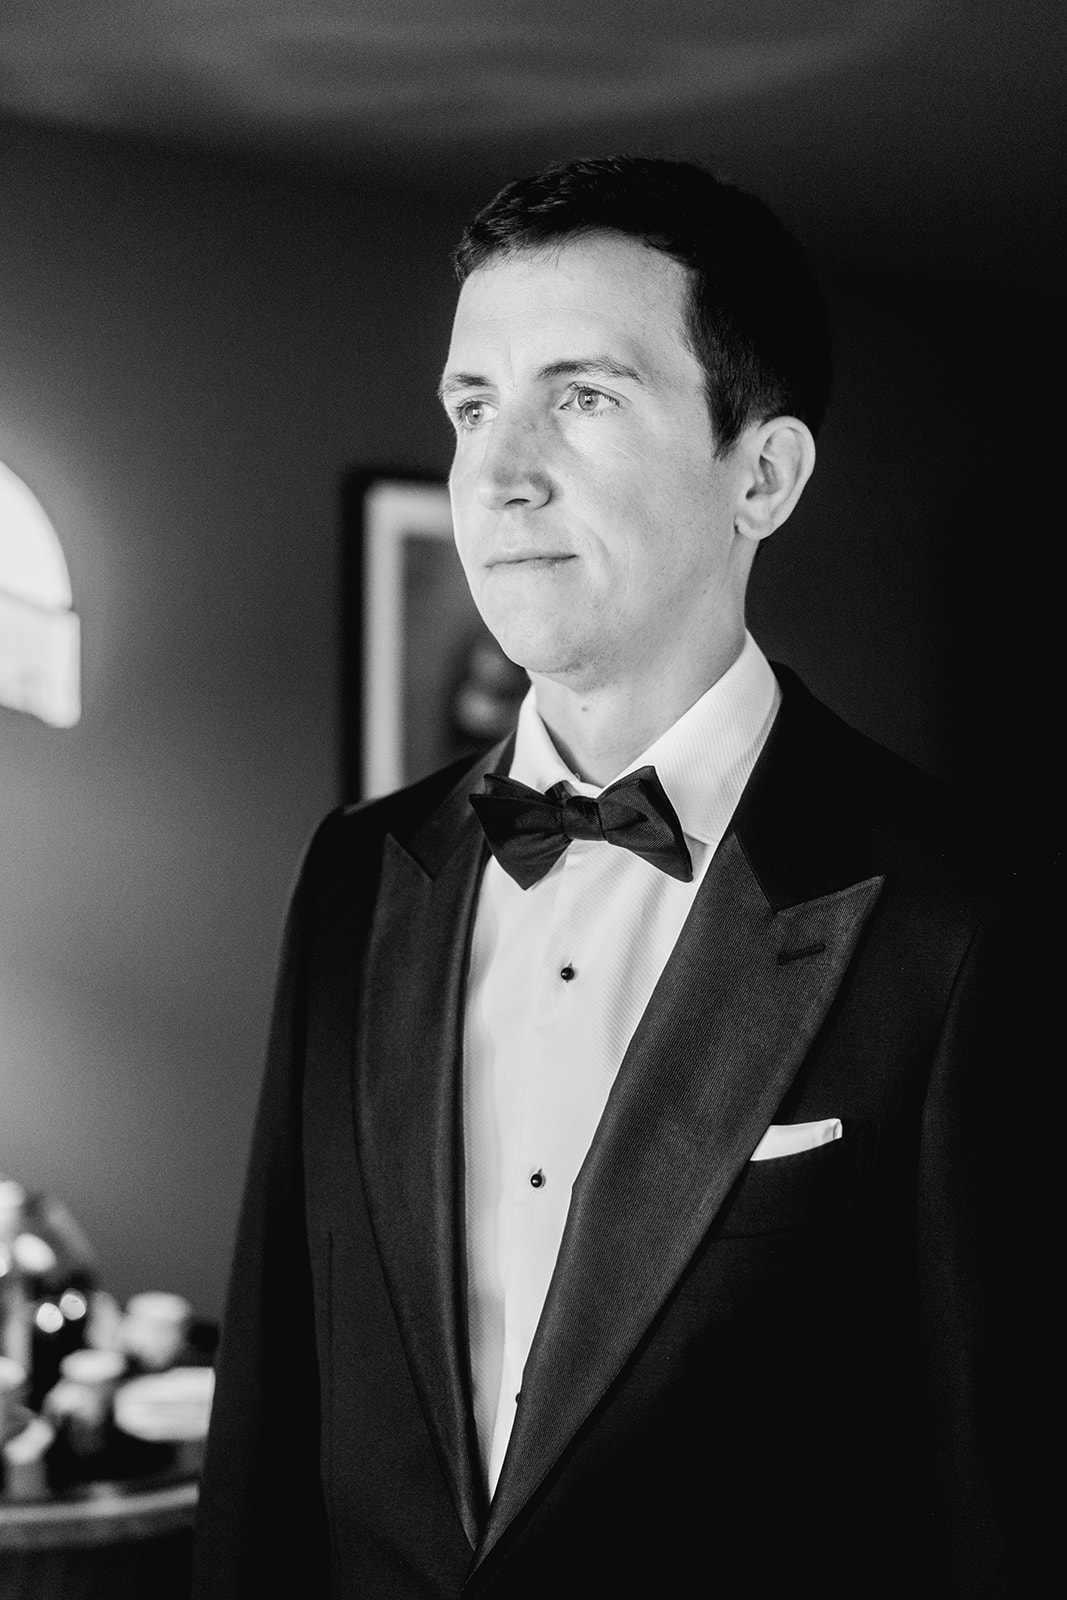 Black and white groom portrait before ceremony at Mayfair House Hotel & Garden in Miami on wedding day.